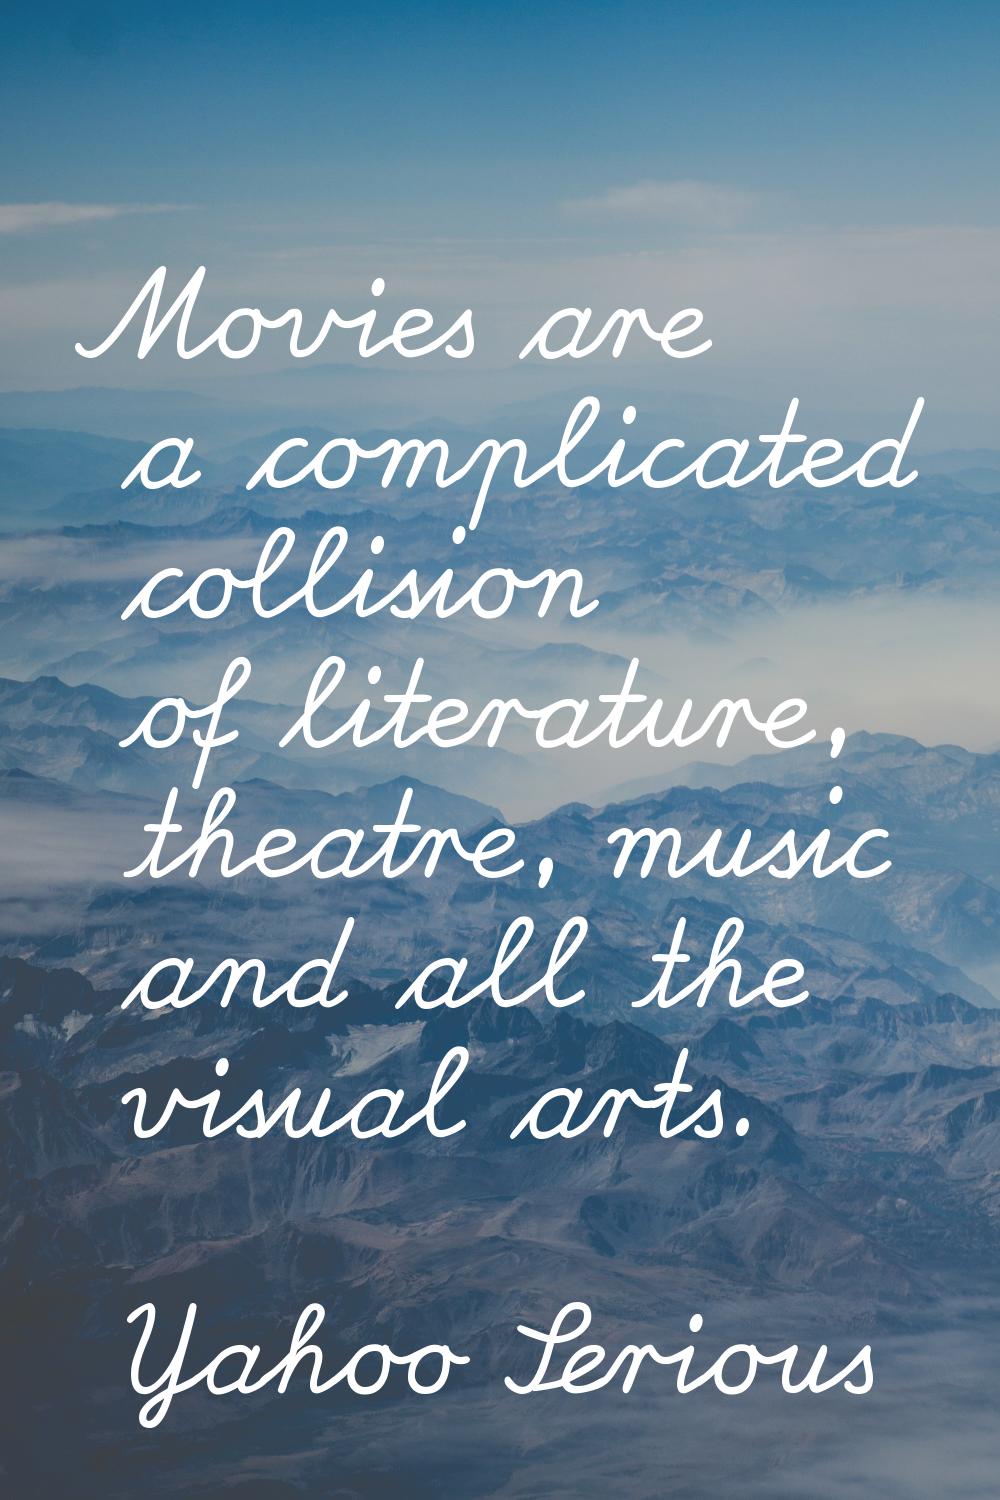 Movies are a complicated collision of literature, theatre, music and all the visual arts.